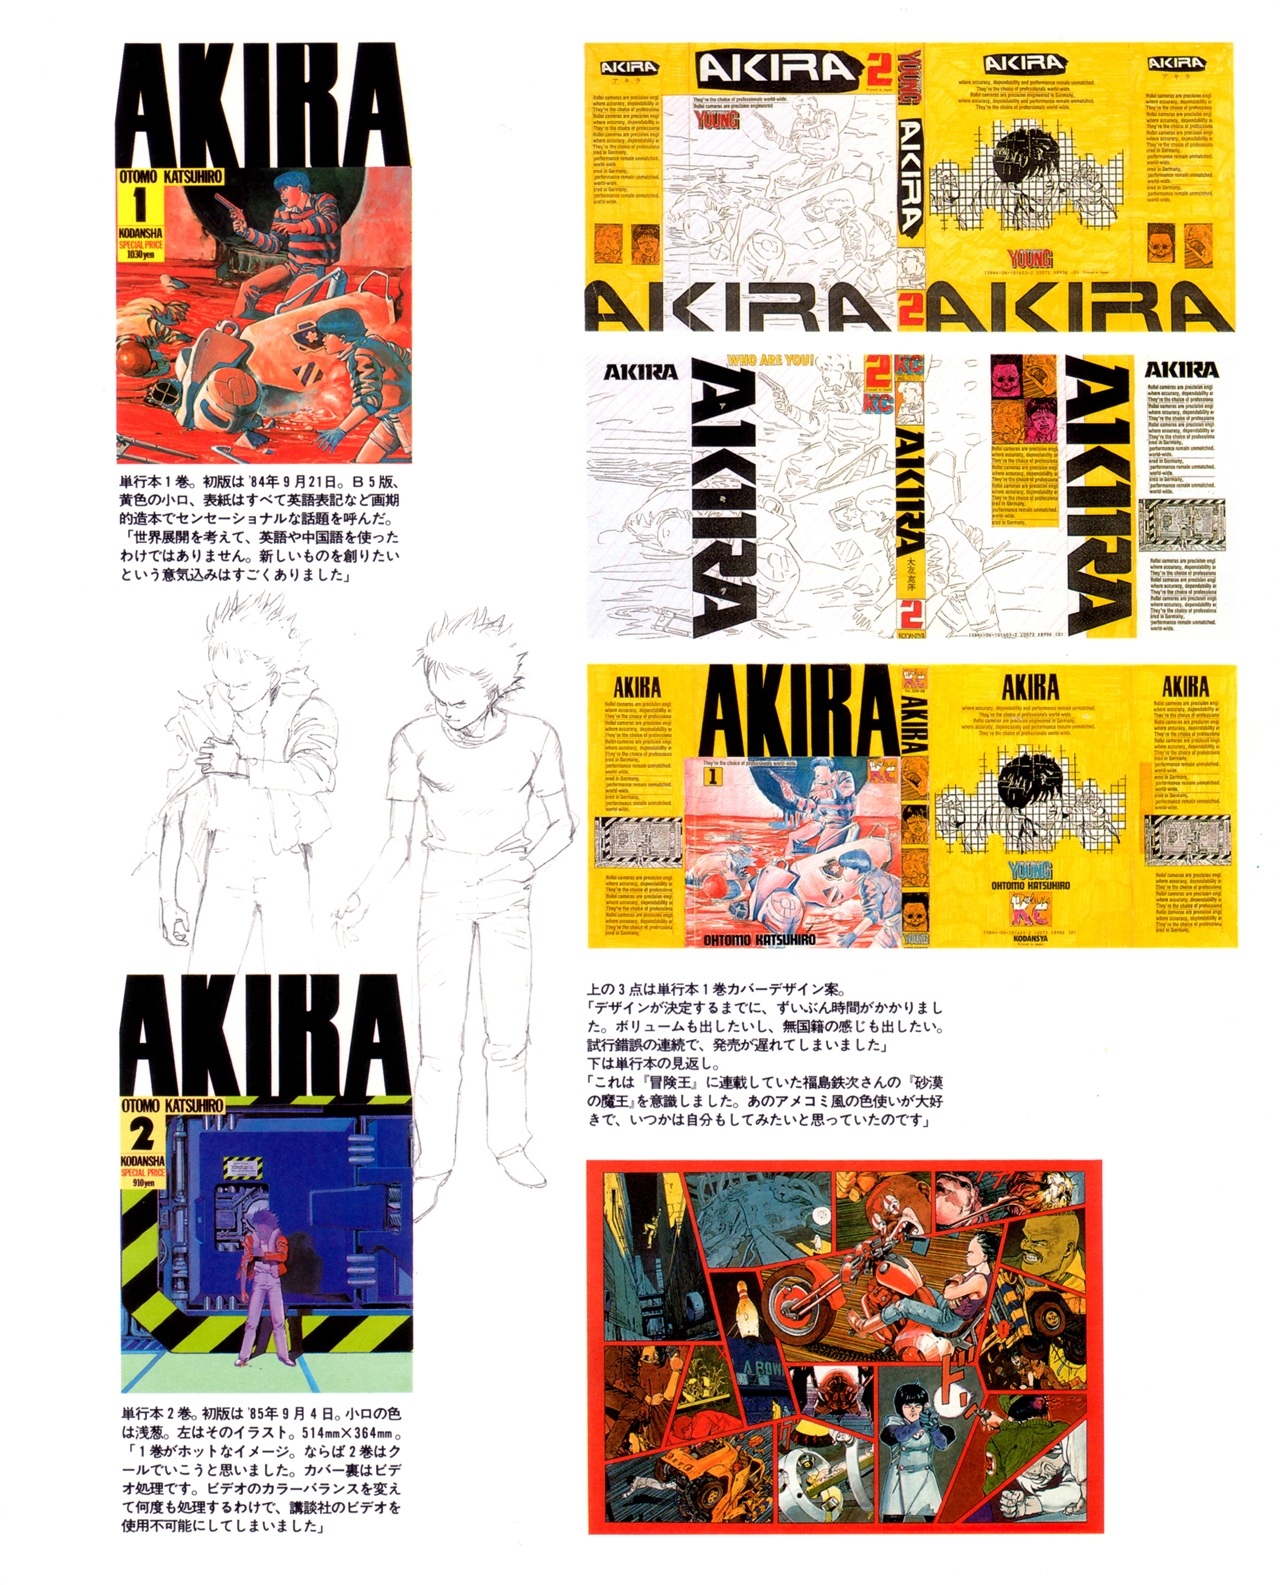 Akira club - The memory of Akira lives on in our hearts! 8